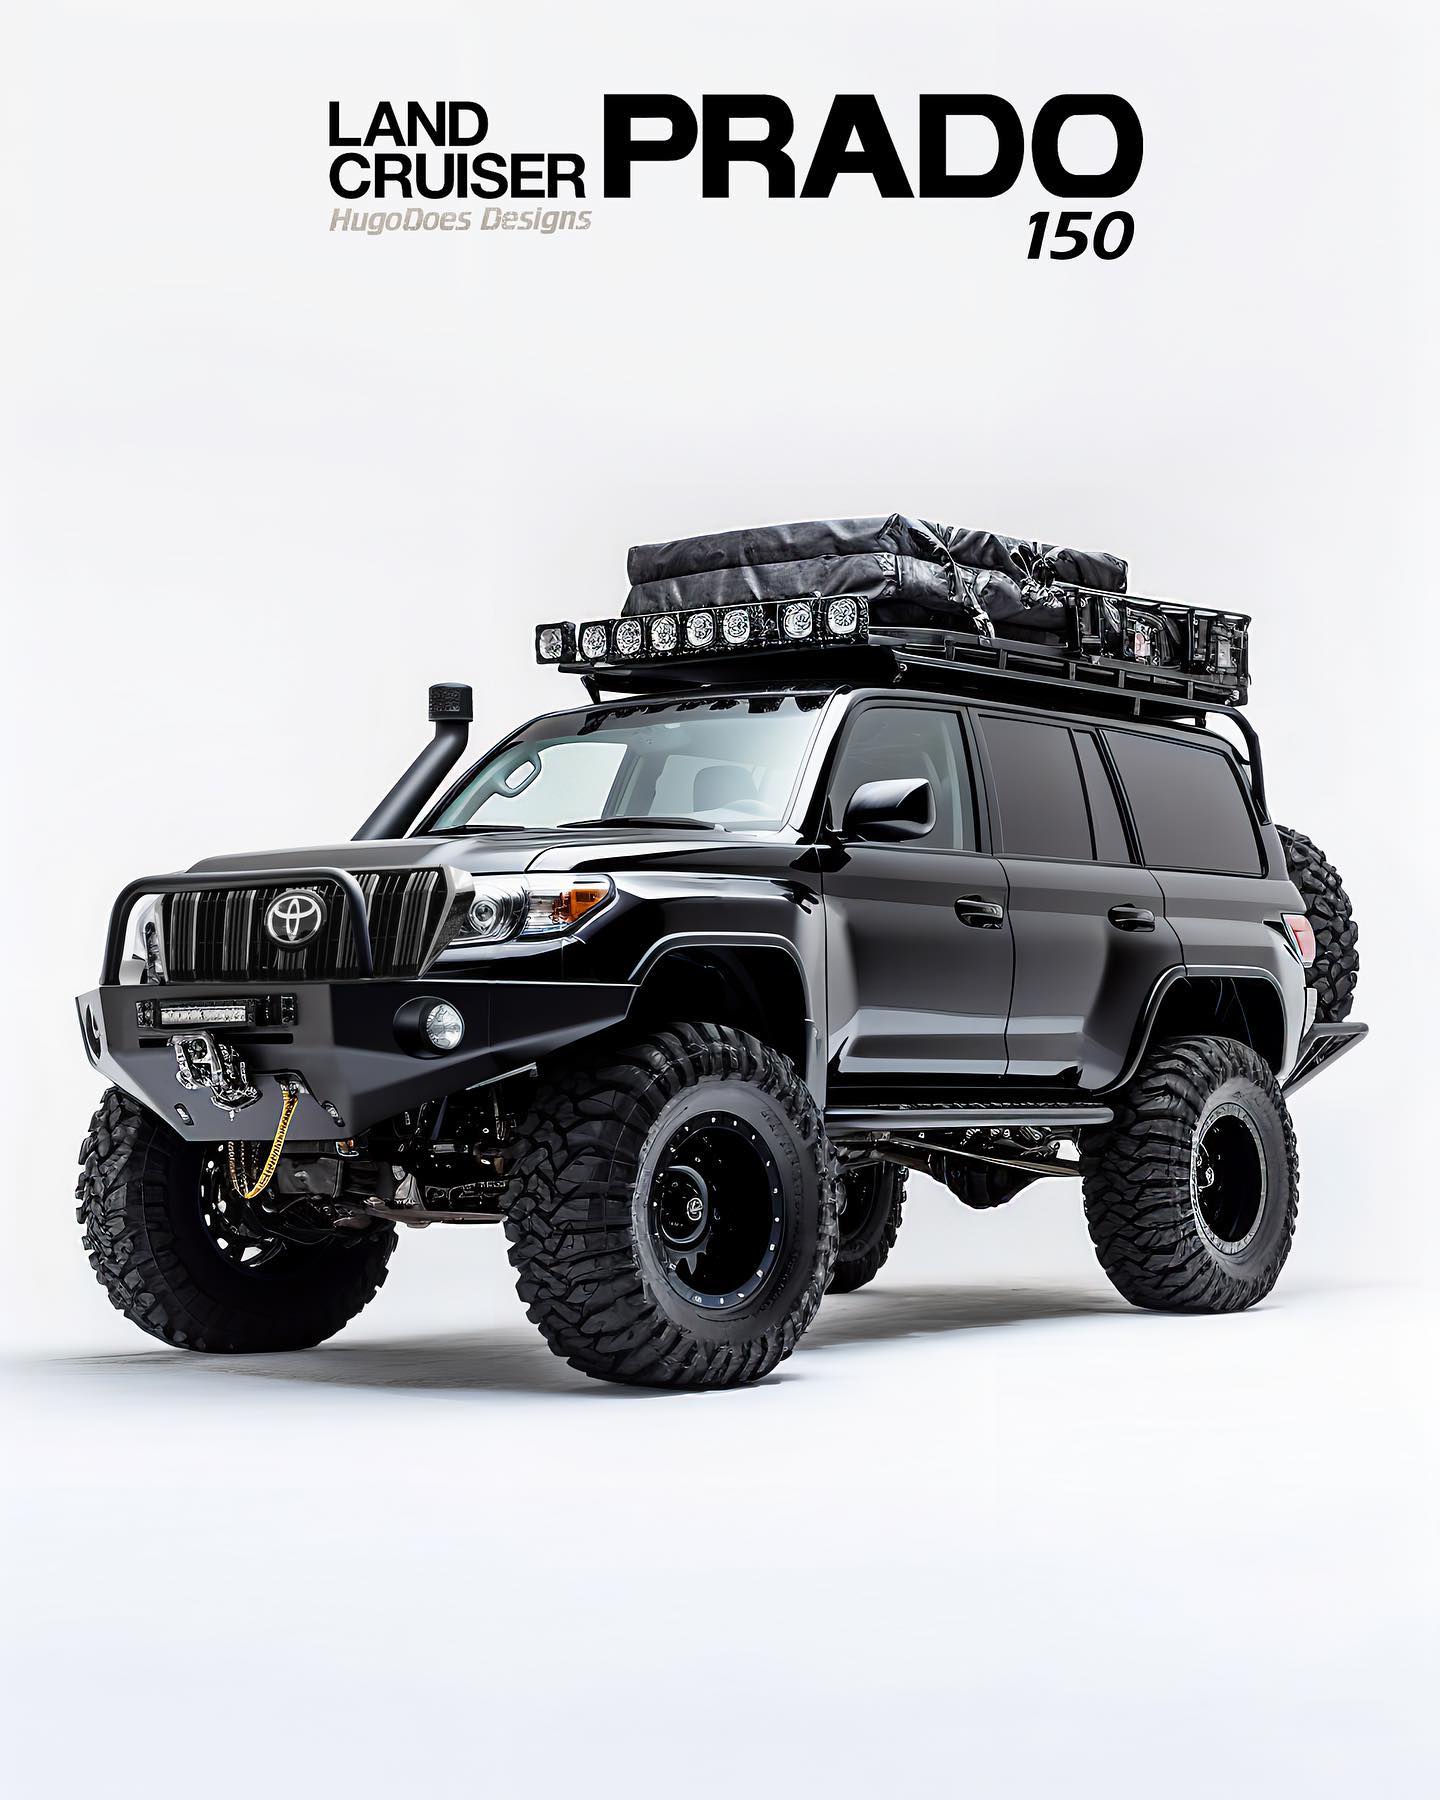 Toyota Land cruiser 79 with a prado 150 front end conversion and overland off-road upgrades